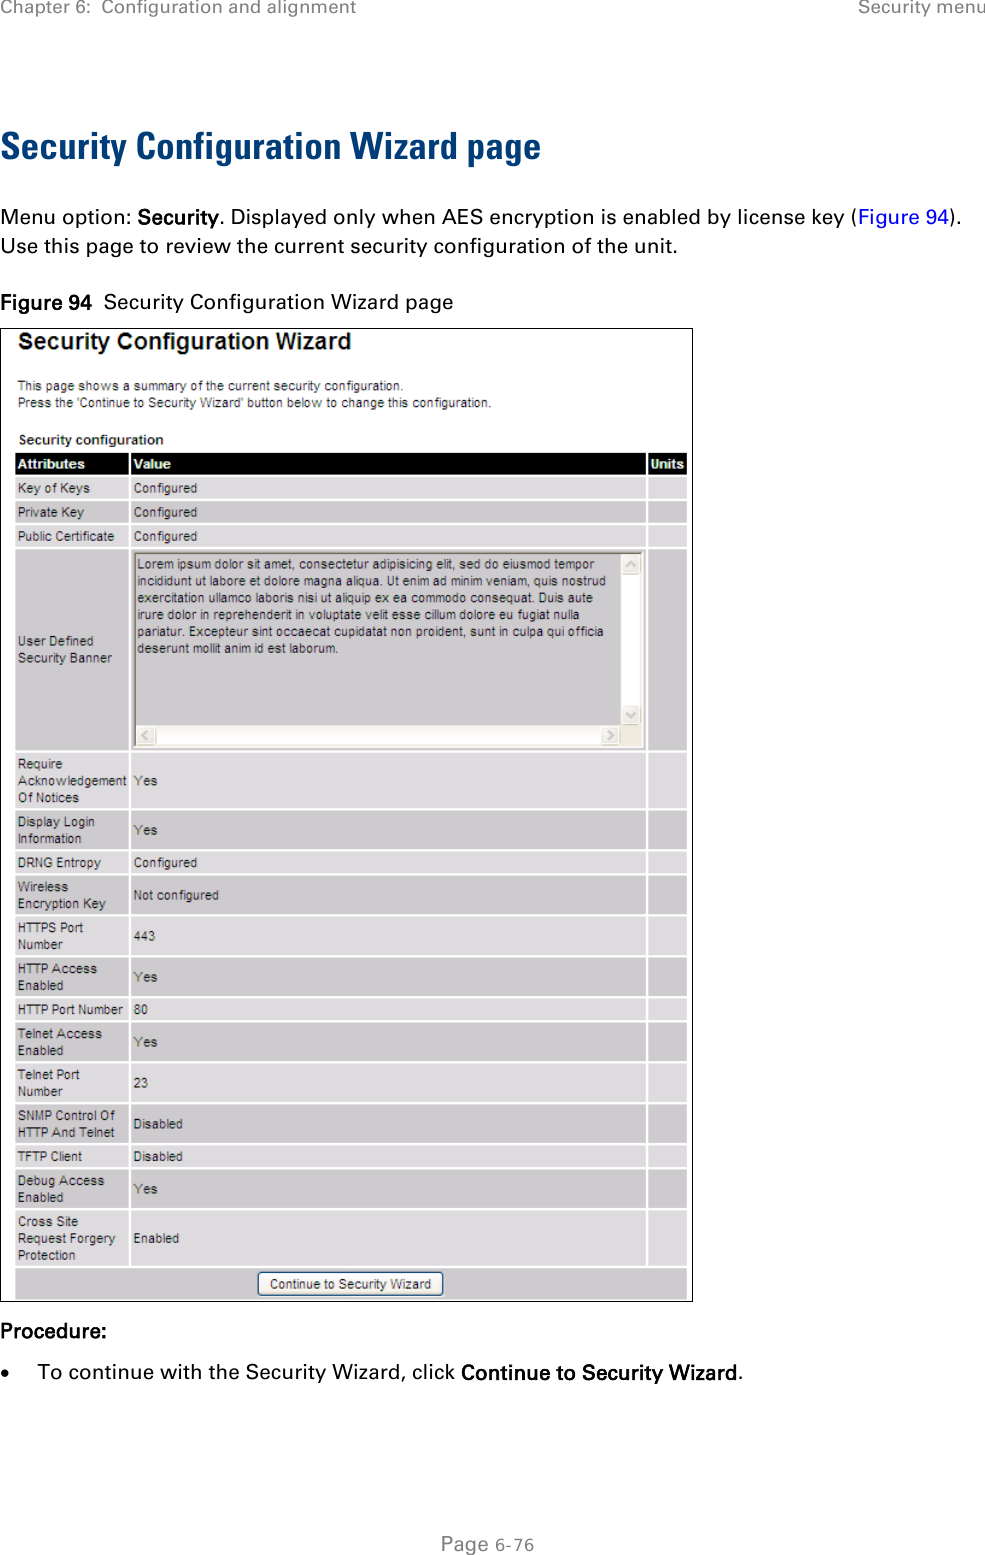 Chapter 6:  Configuration and alignment Security menu  Security Configuration Wizard page Menu option: Security. Displayed only when AES encryption is enabled by license key (Figure 94). Use this page to review the current security configuration of the unit. Figure 94  Security Configuration Wizard page  Procedure: • To continue with the Security Wizard, click Continue to Security Wizard.   Page 6-76 